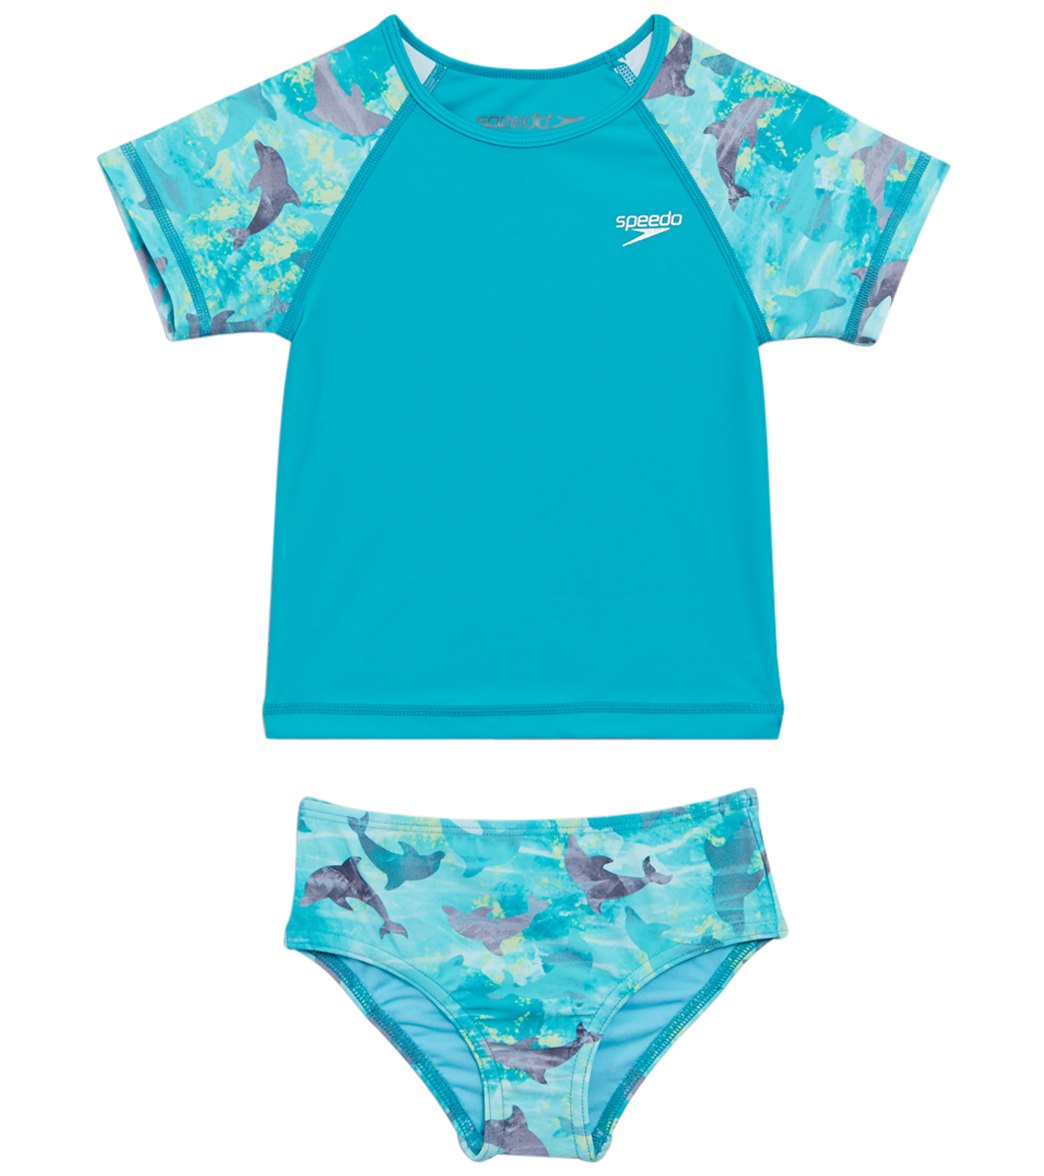 Speedo Girls' Learn To Swim Printed Short Sleeve Rash Guard Two Piece Set 12 Months-3T - New Turquoise 12 Months Polyester/Spandex - Swimoutlet.com